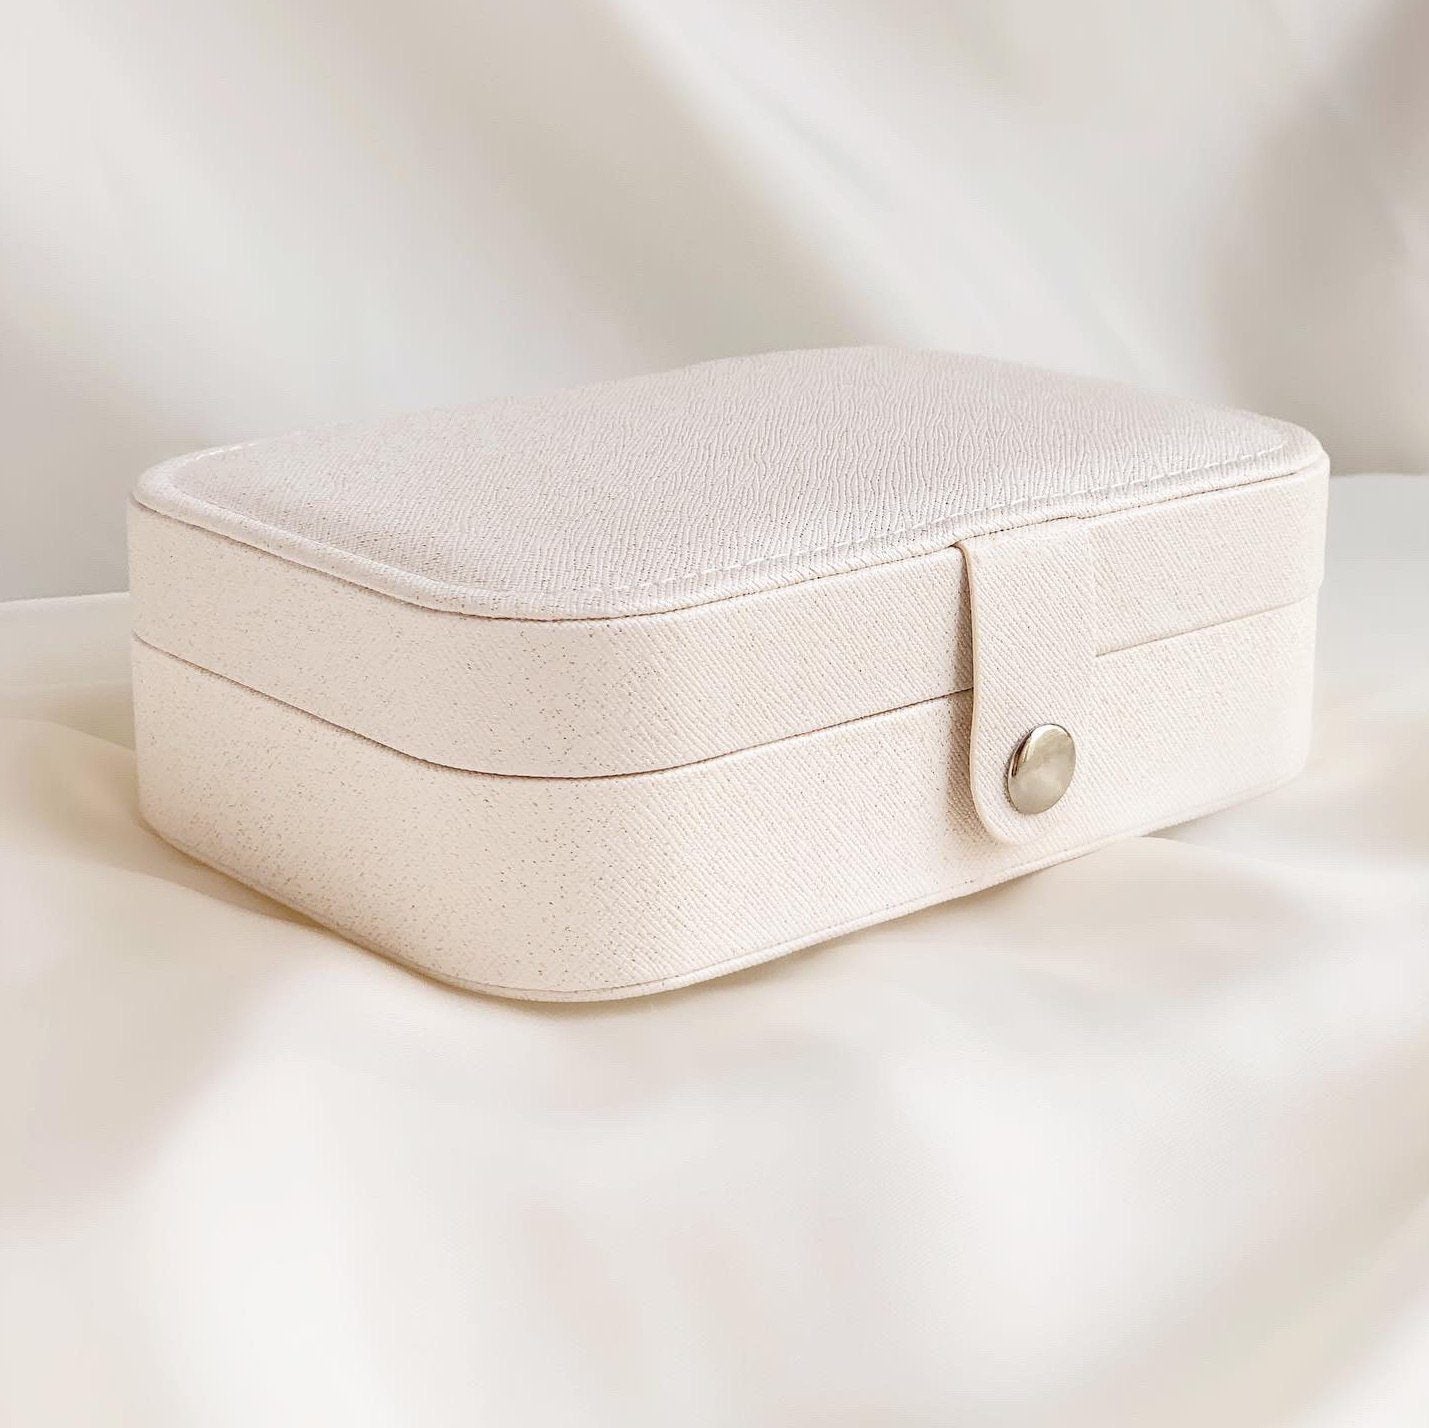 White jewelry carrying case sitting on a white piece of satin.